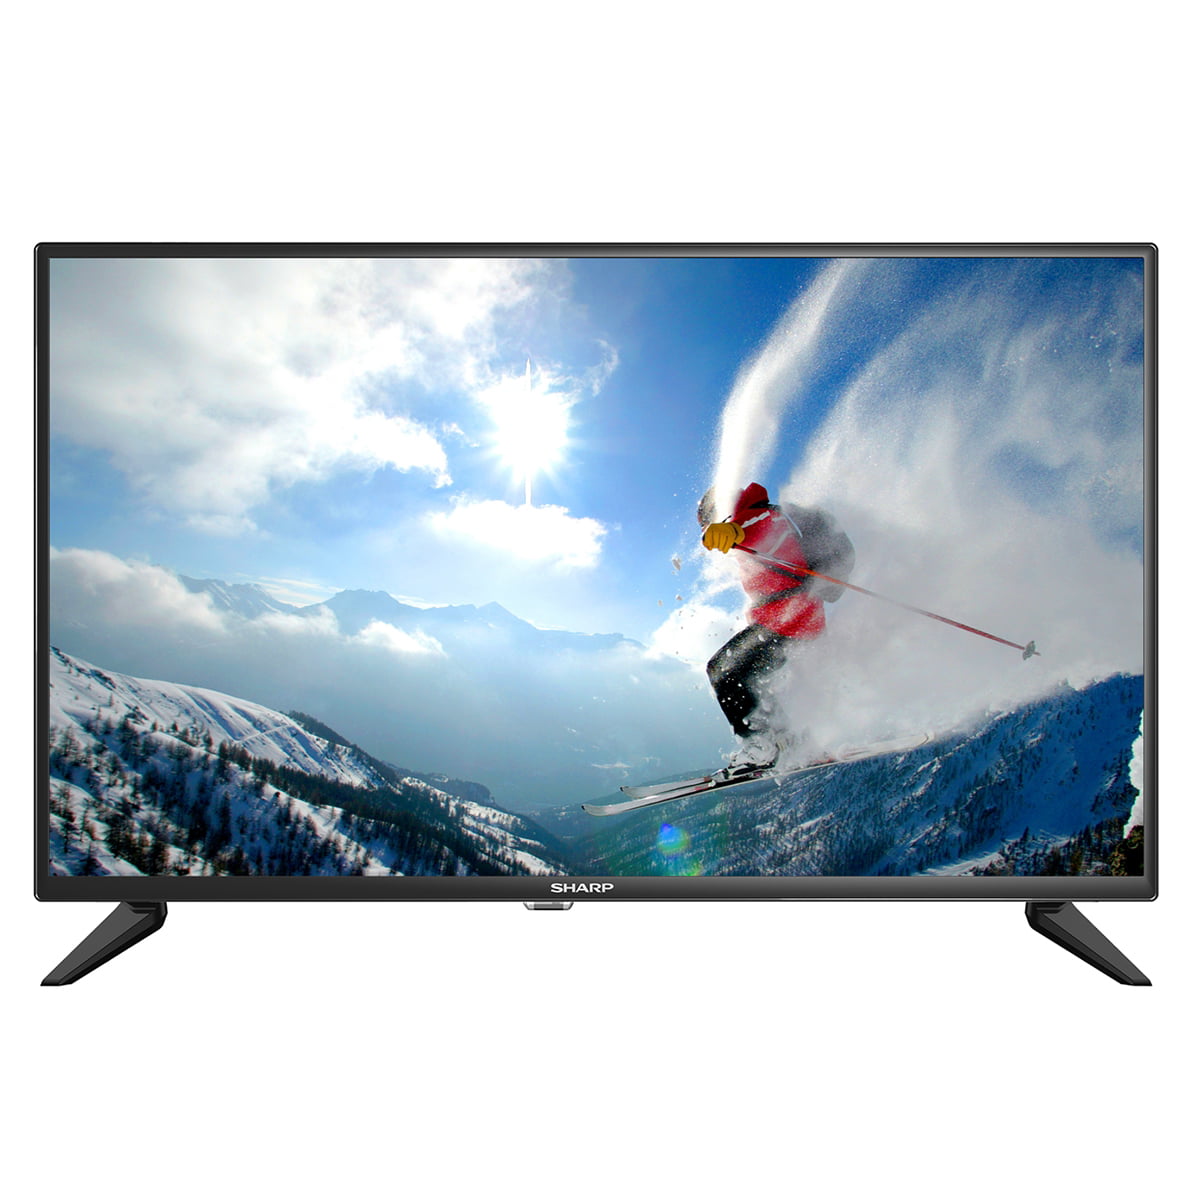 IKRON 1920x1080 32 inch Full HD Smart LED TV at Rs 8500/piece in